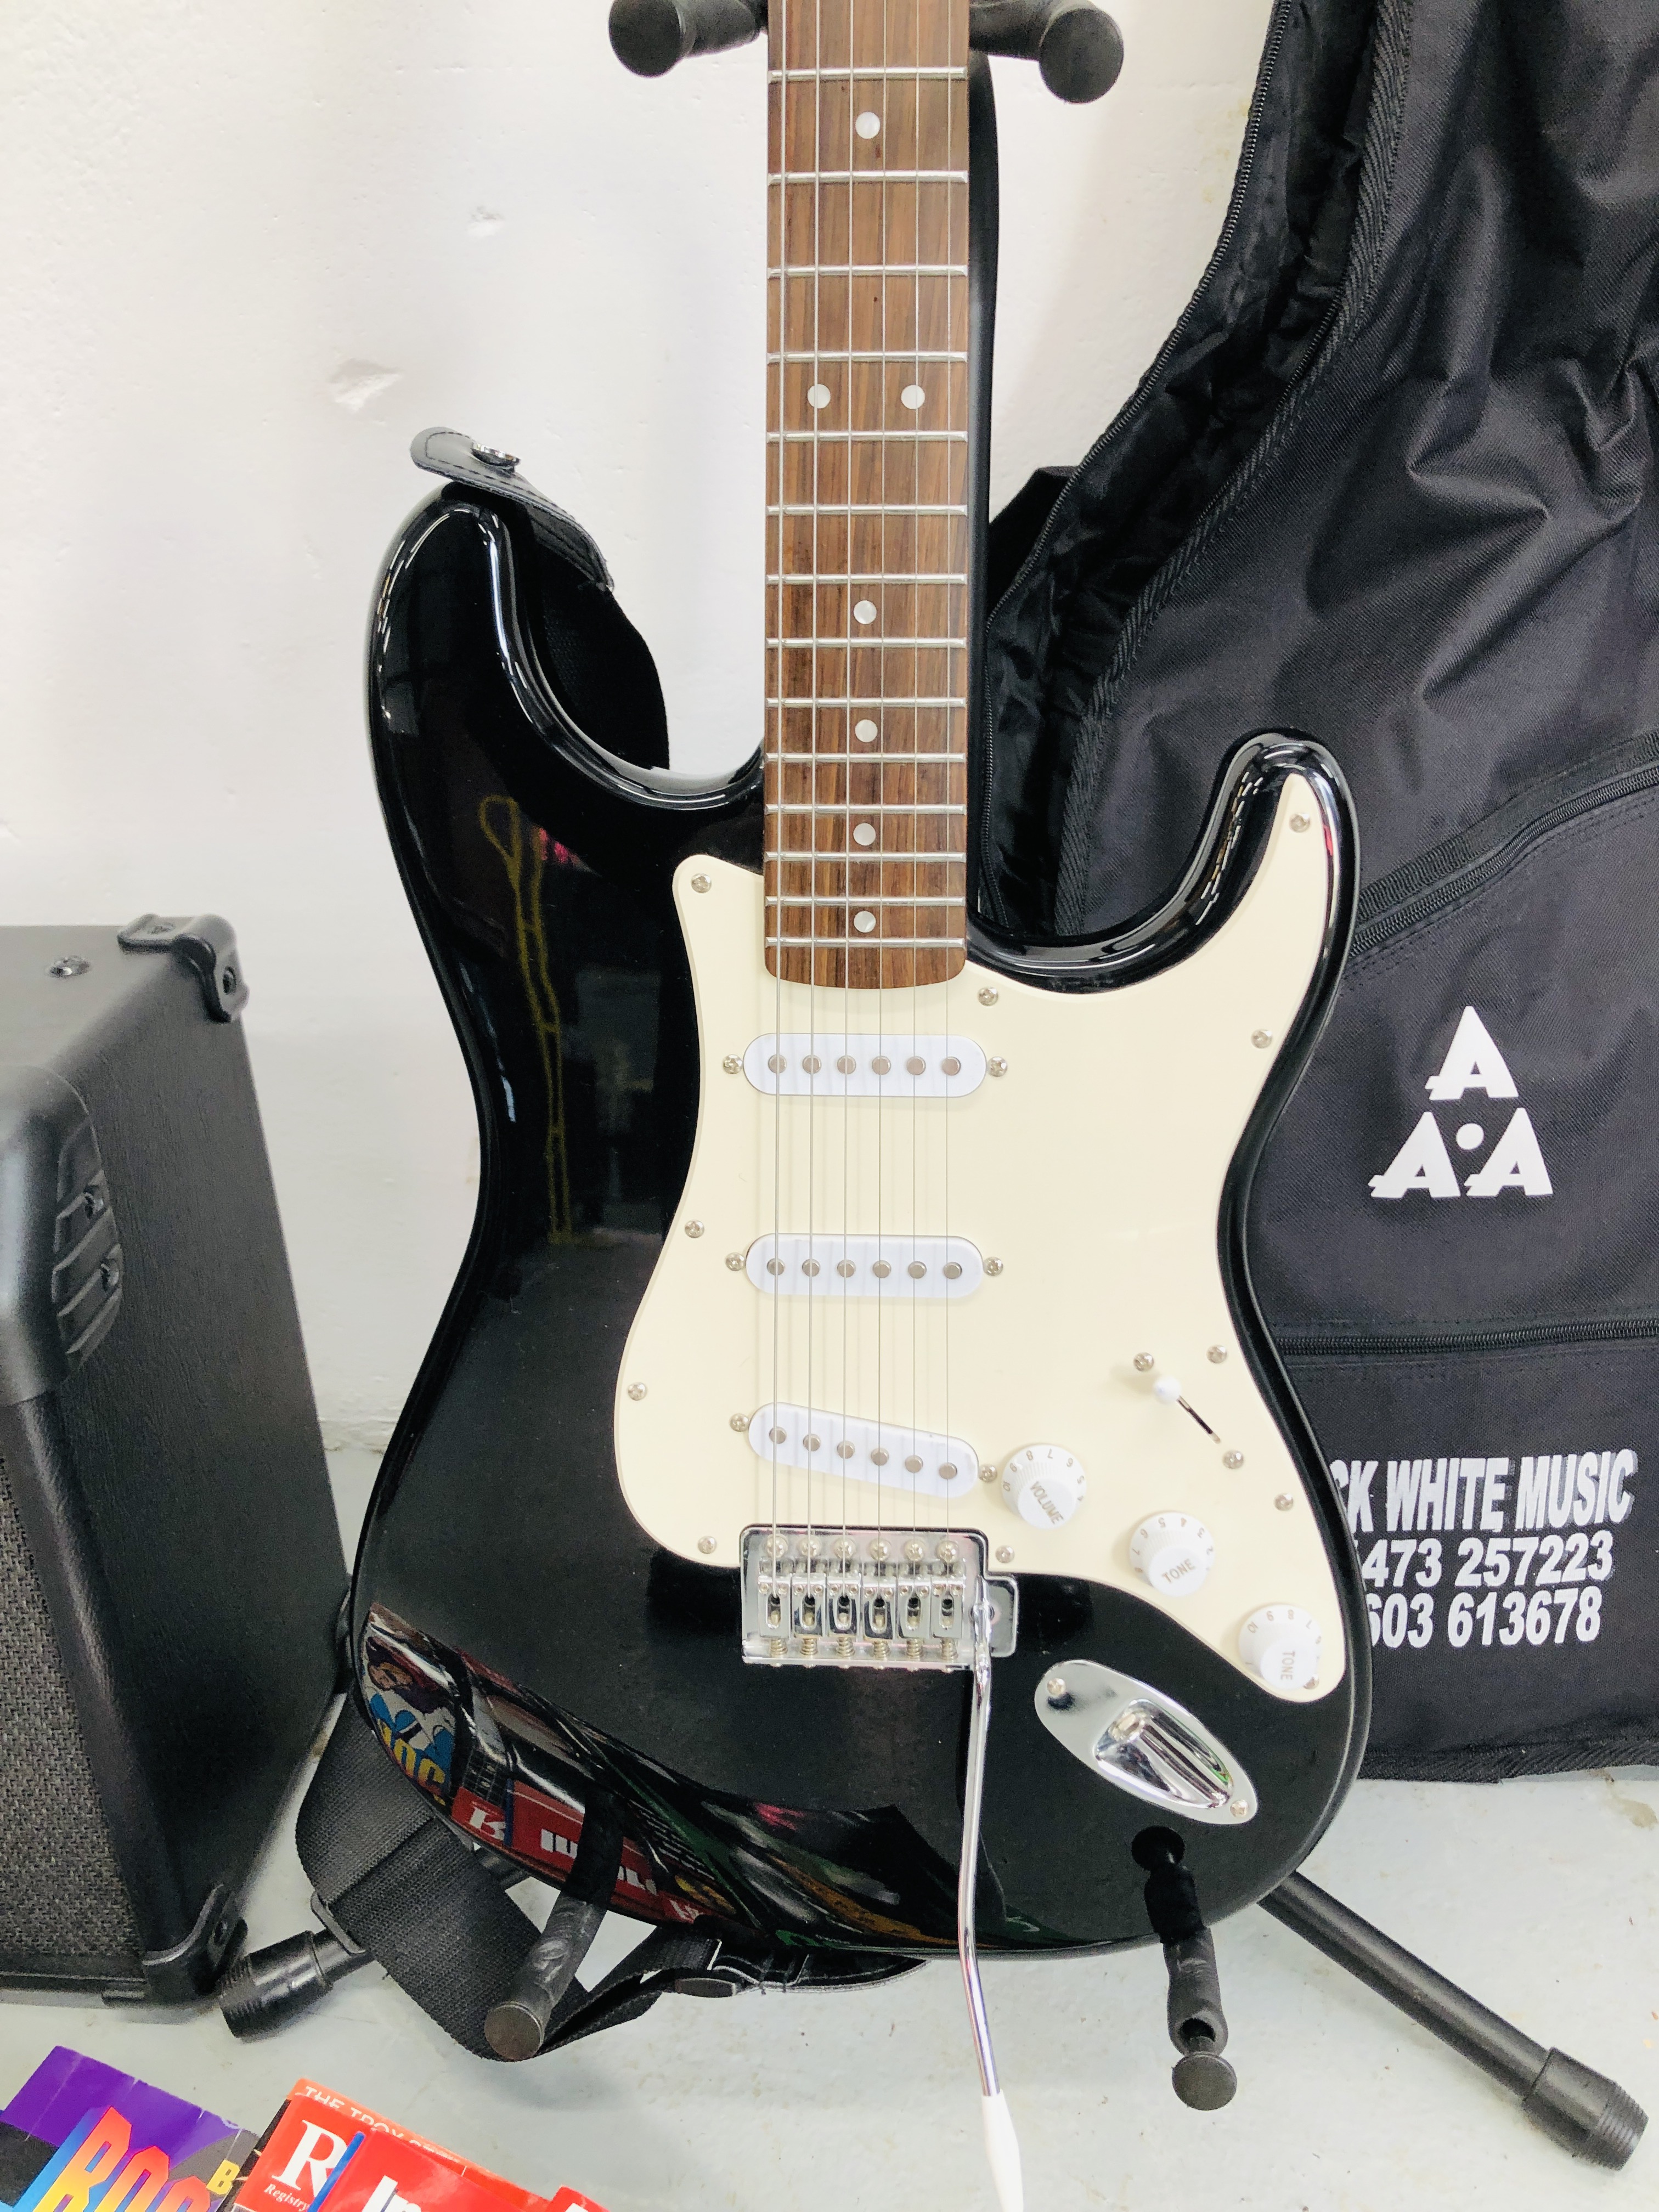 FEND SQUIER ELECTRIC GUITAR WITH A STAND & GUITAR BOOKS + LINE 6 AMP SPIDER IV 15 - SOLD AS SEEN - Image 2 of 7